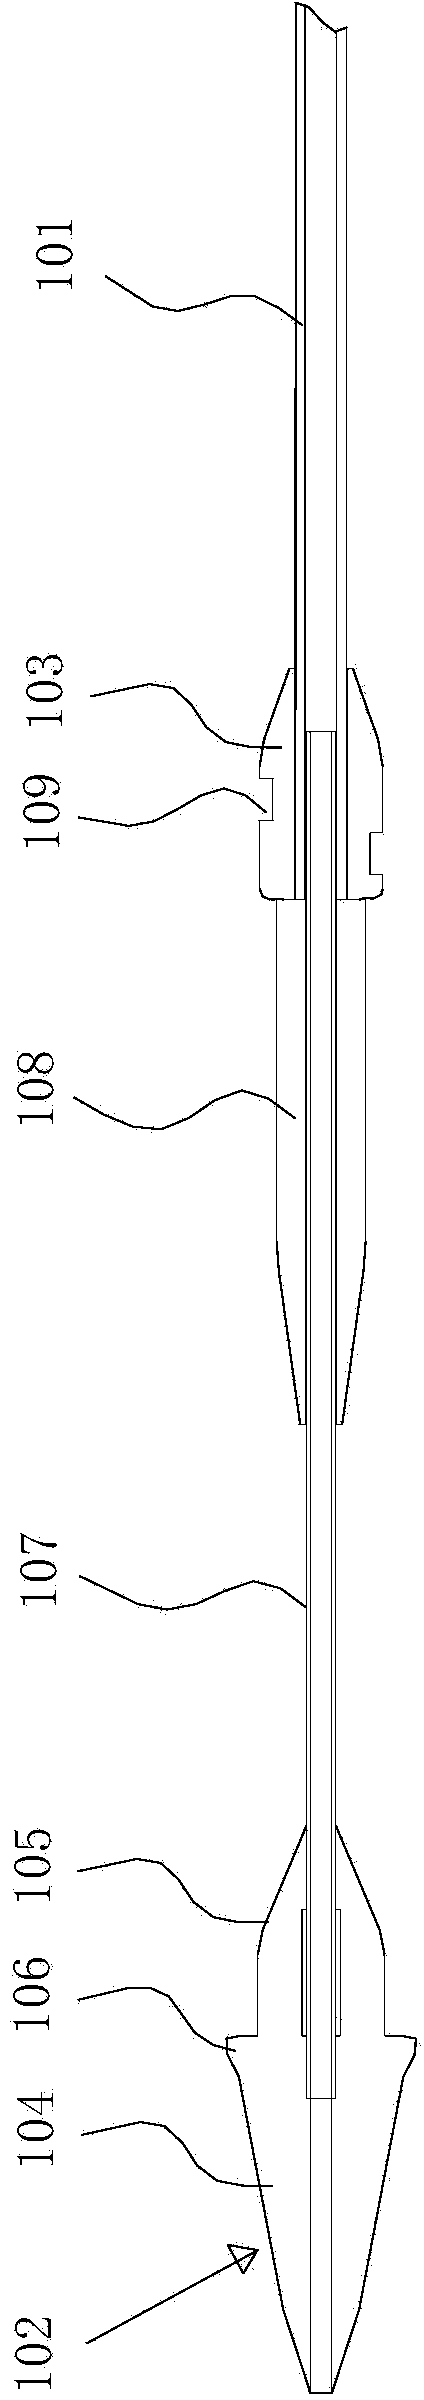 Sheath-core for conveying interventional device and conveying system with sheath-core